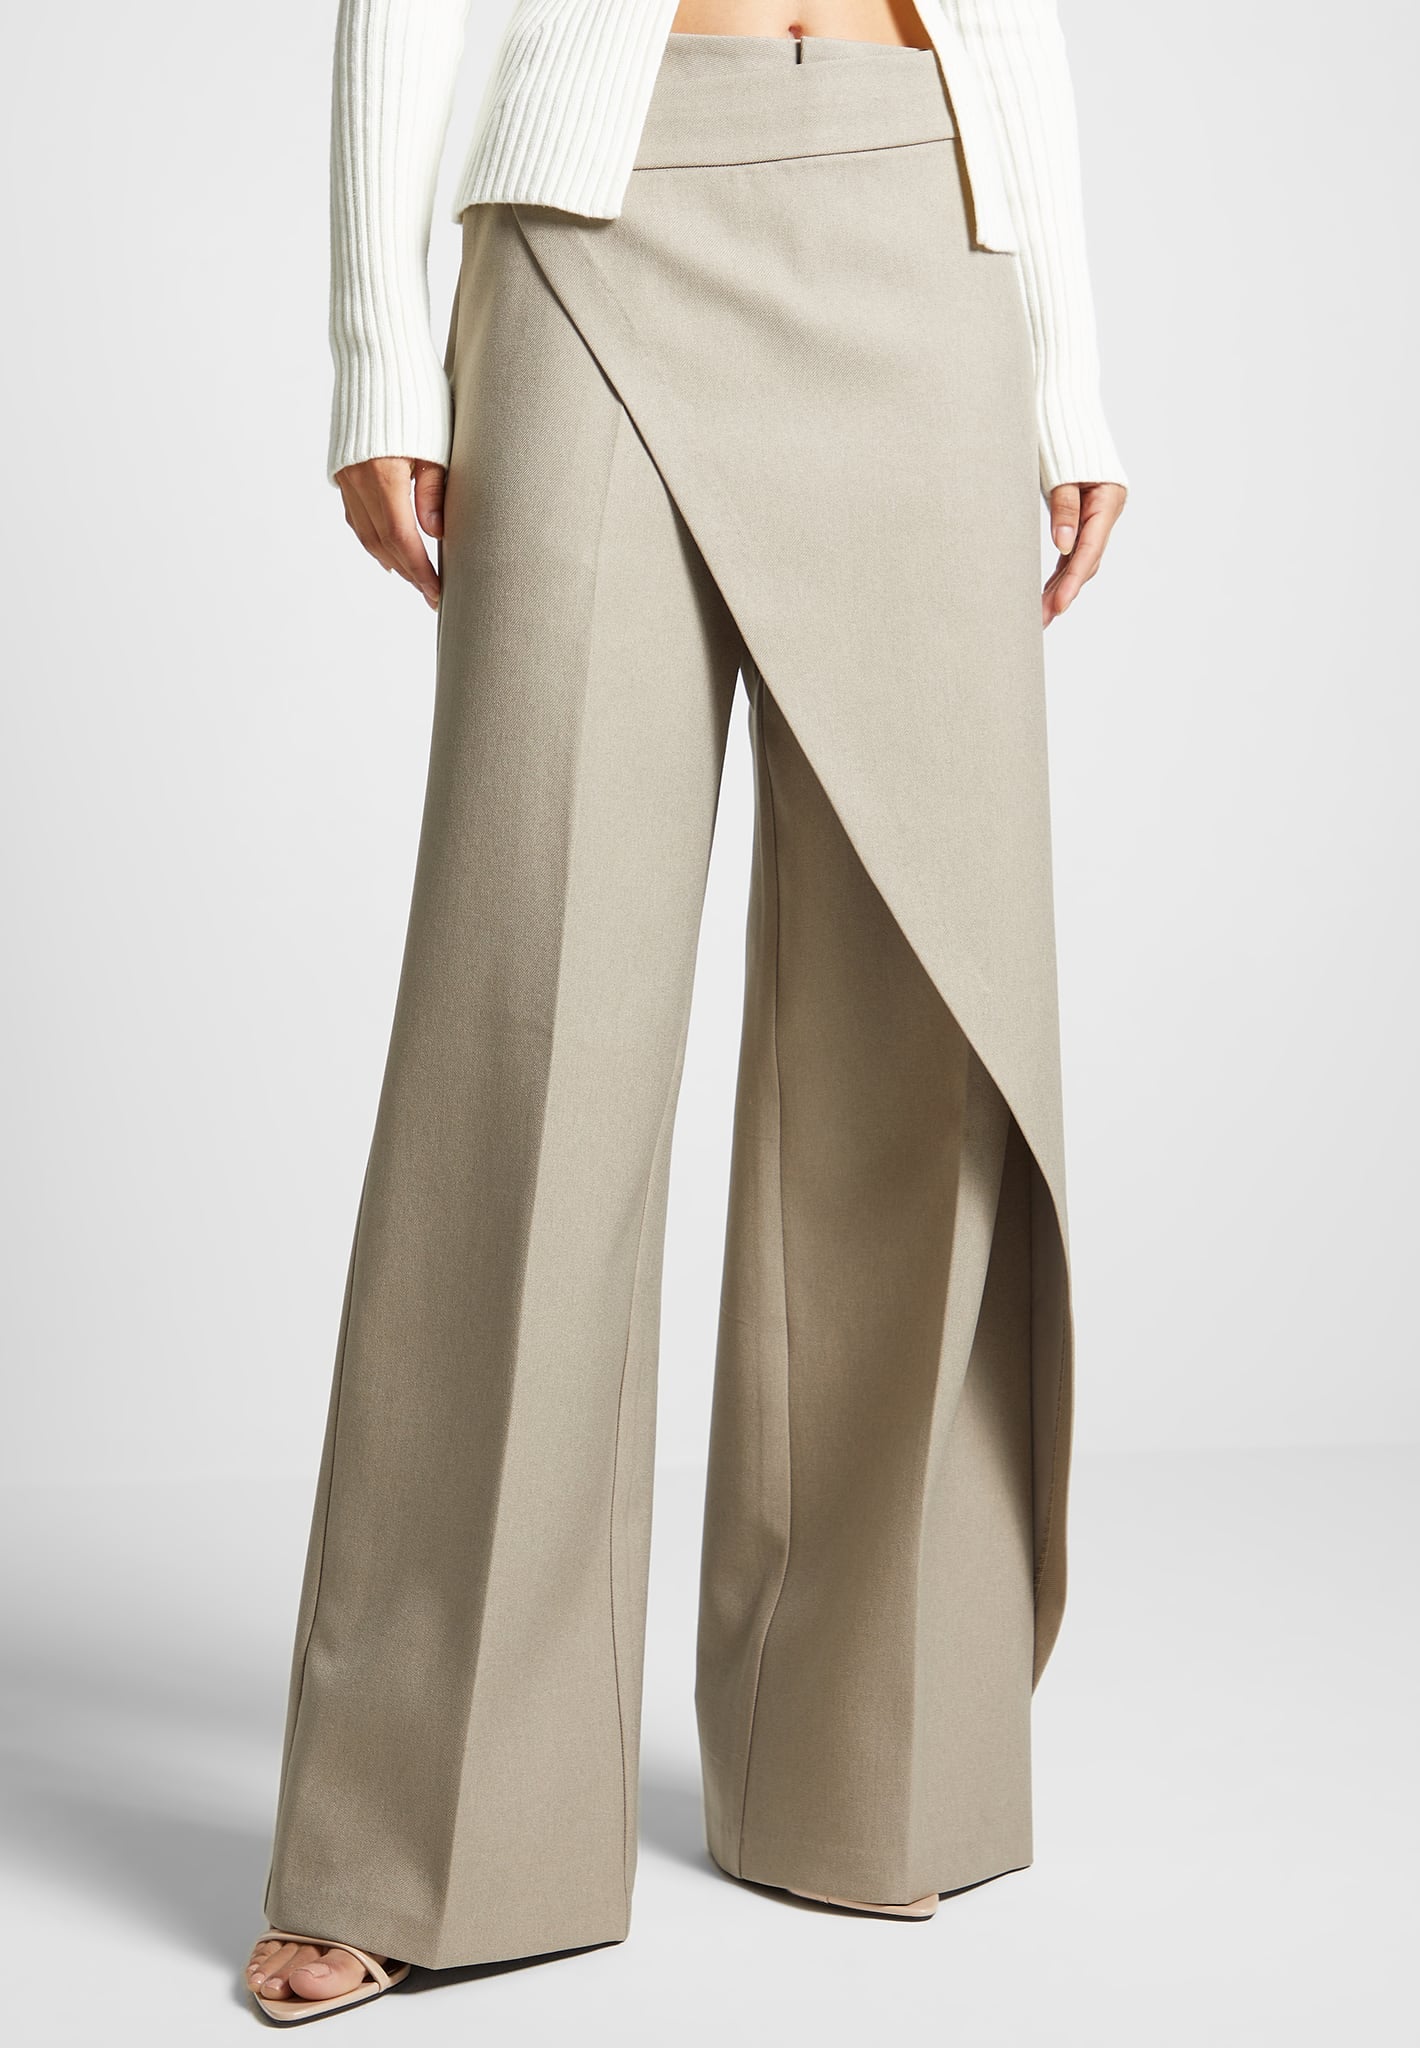 ANOUKI high-waisted Tailored Trousers - Farfetch